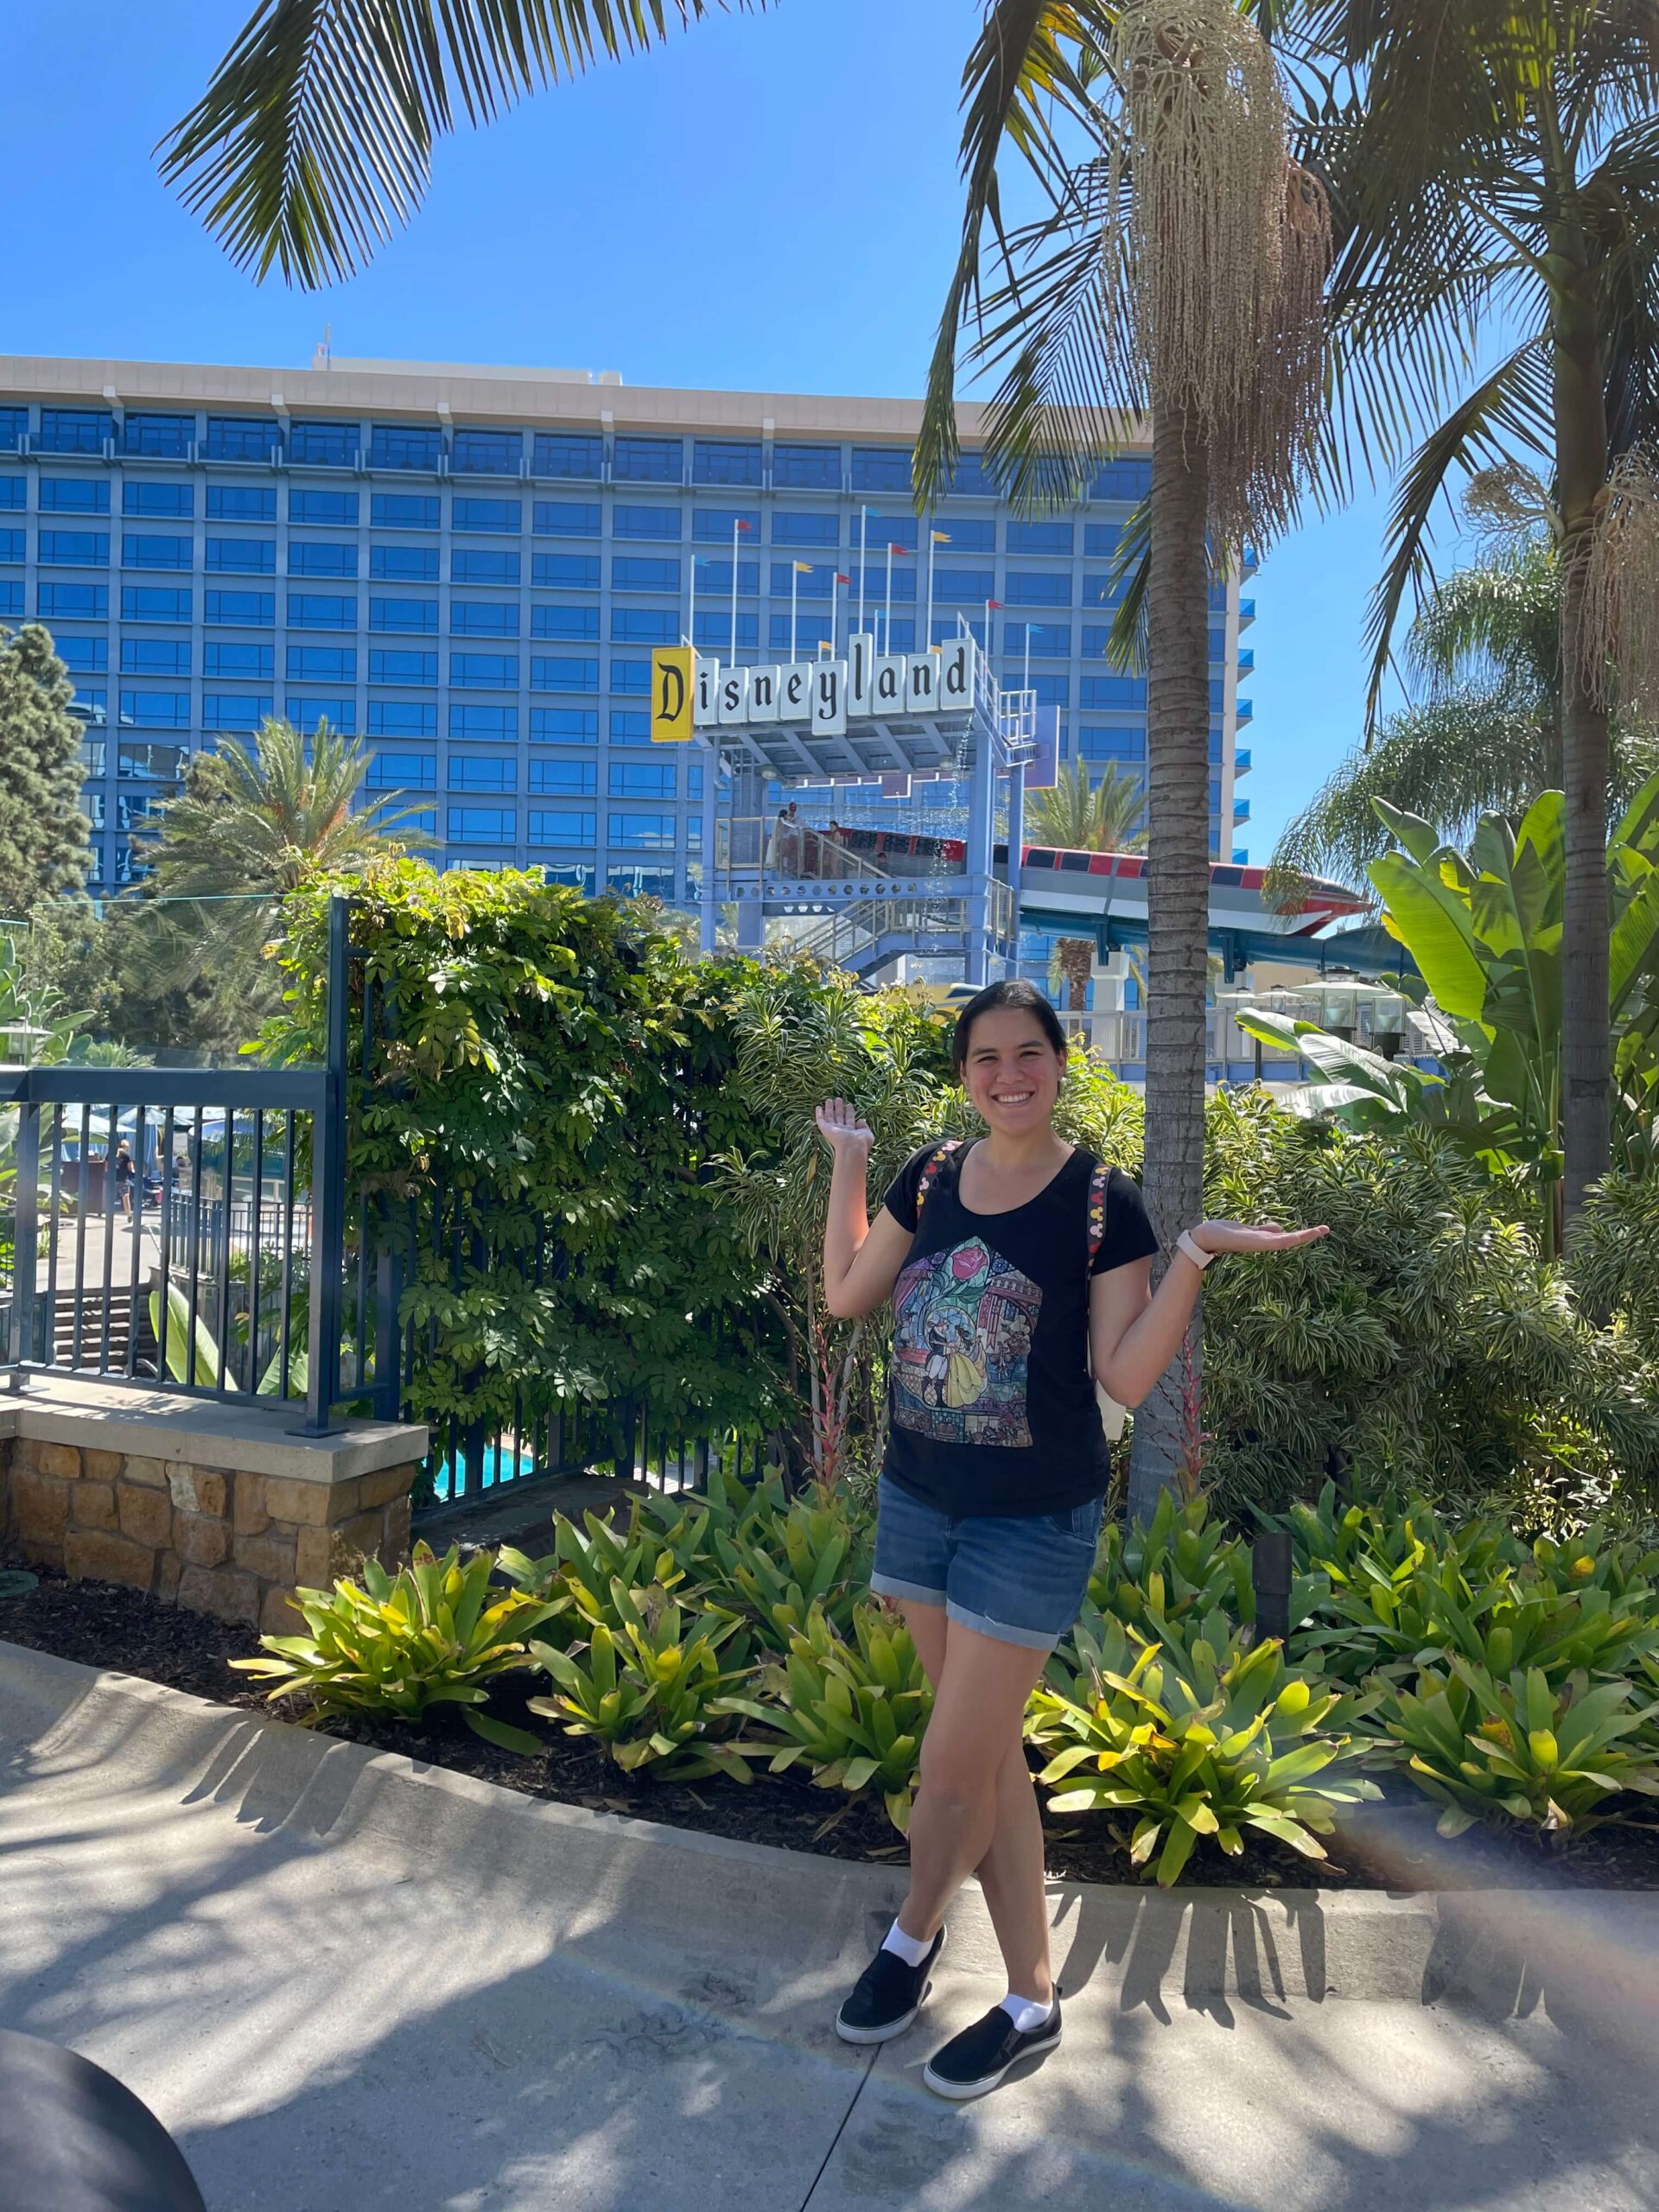 me standing among landscaping in front of the disneyland hotel sign